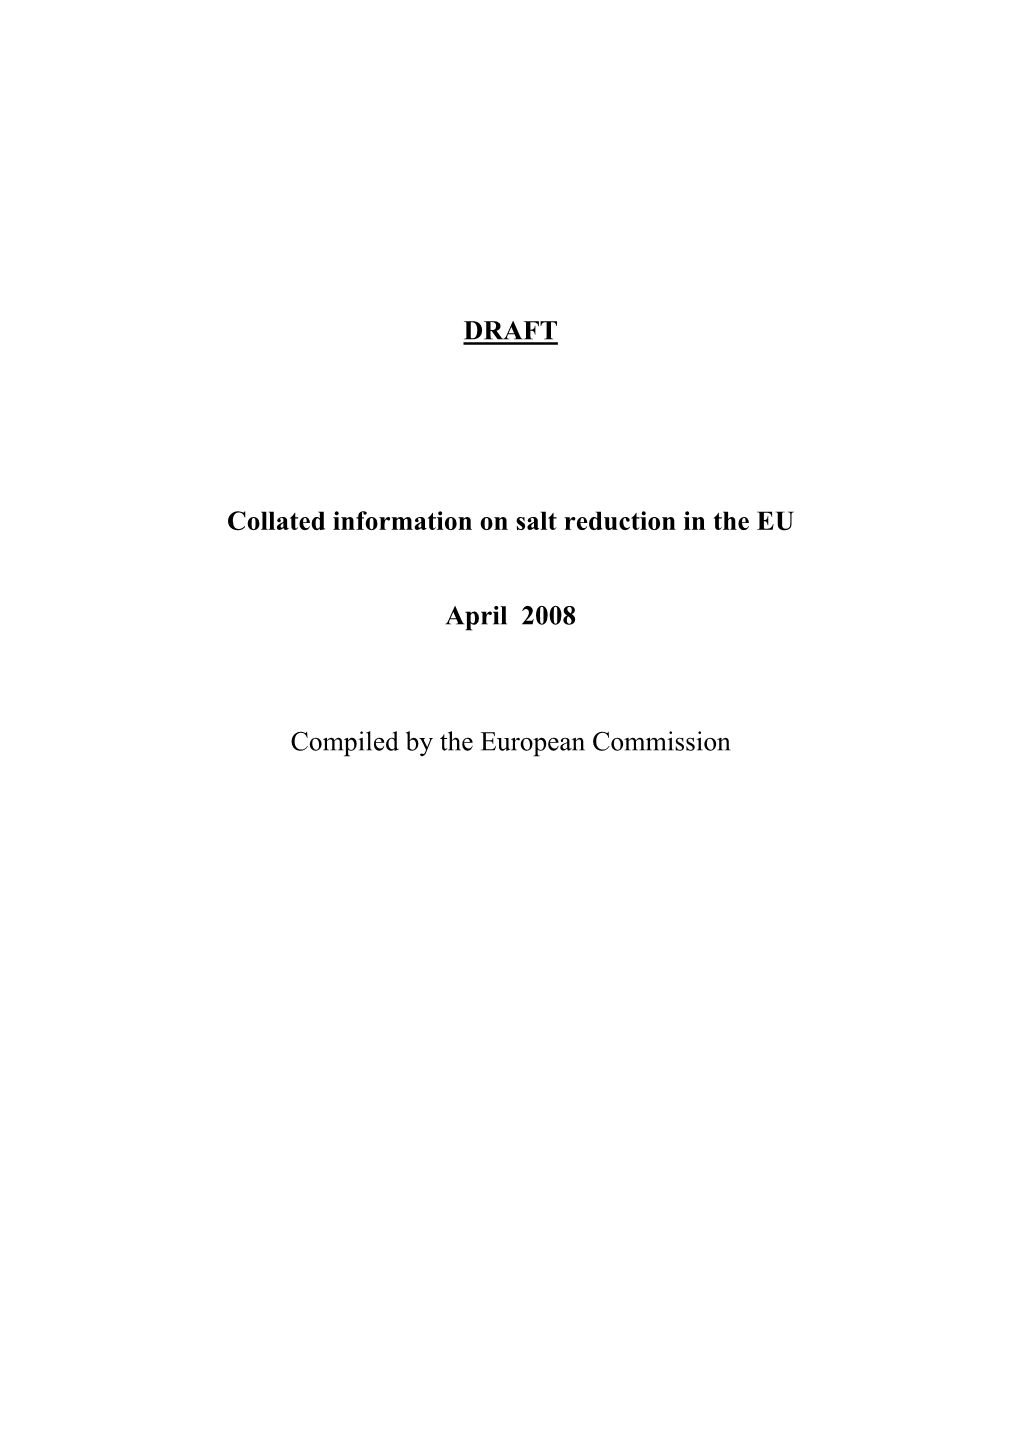 DRAFT Collated Information on Salt Reduction in the EU April 2008